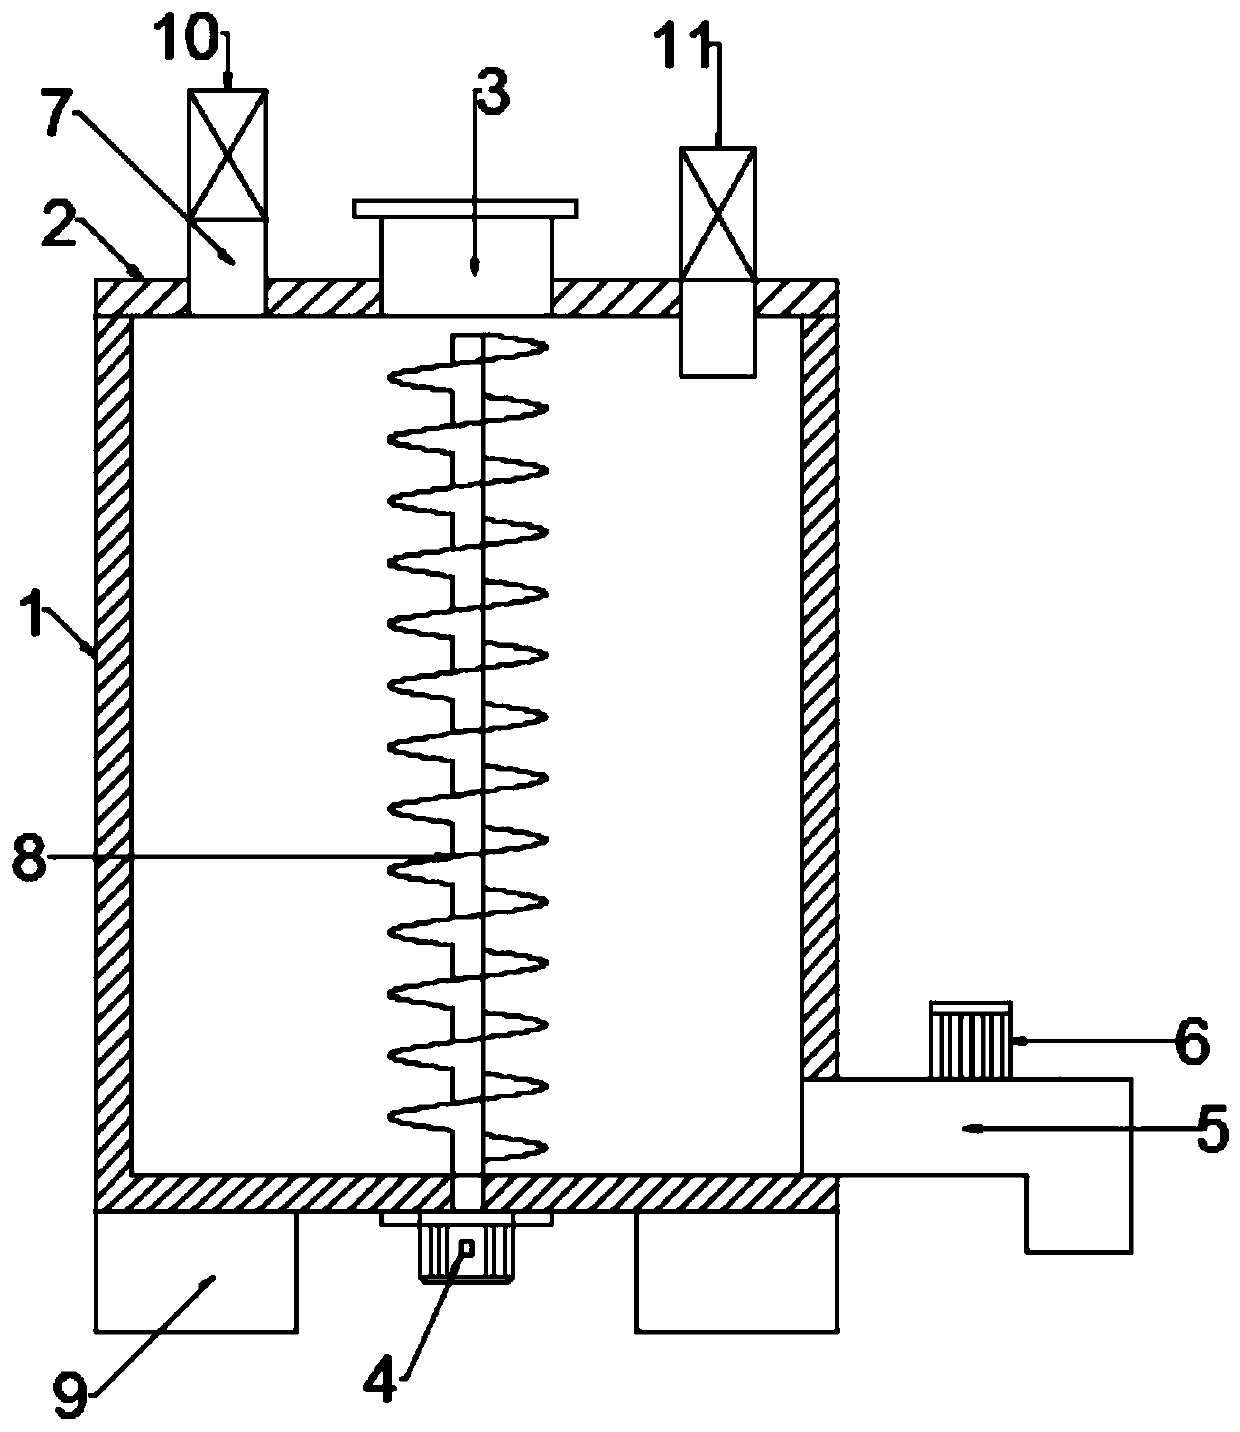 Impulse-type grouting apparatus with variable voltage variable frequency